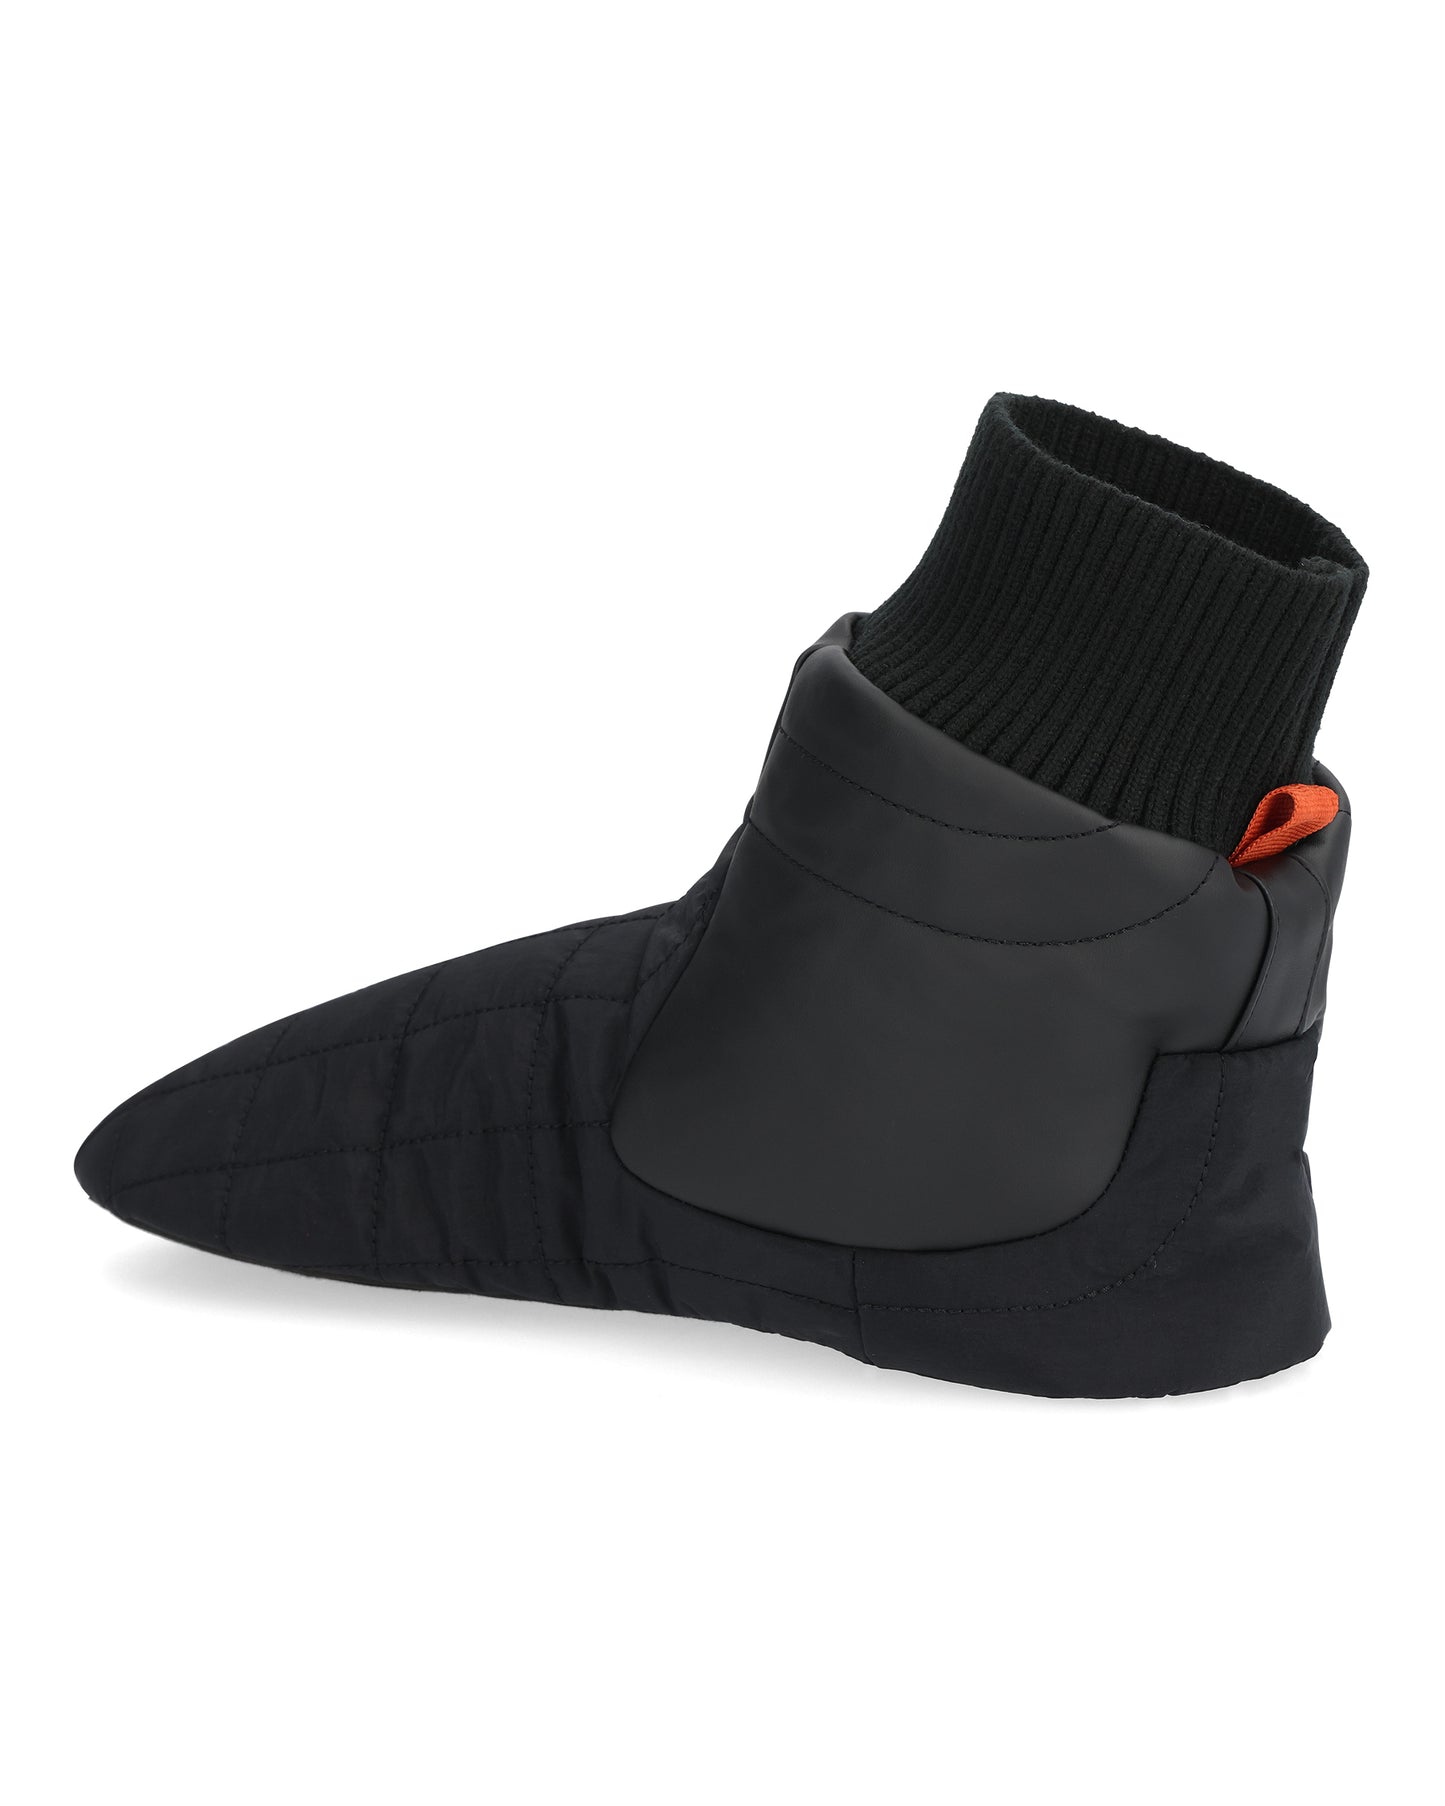 Bulkley Insulated Bootie